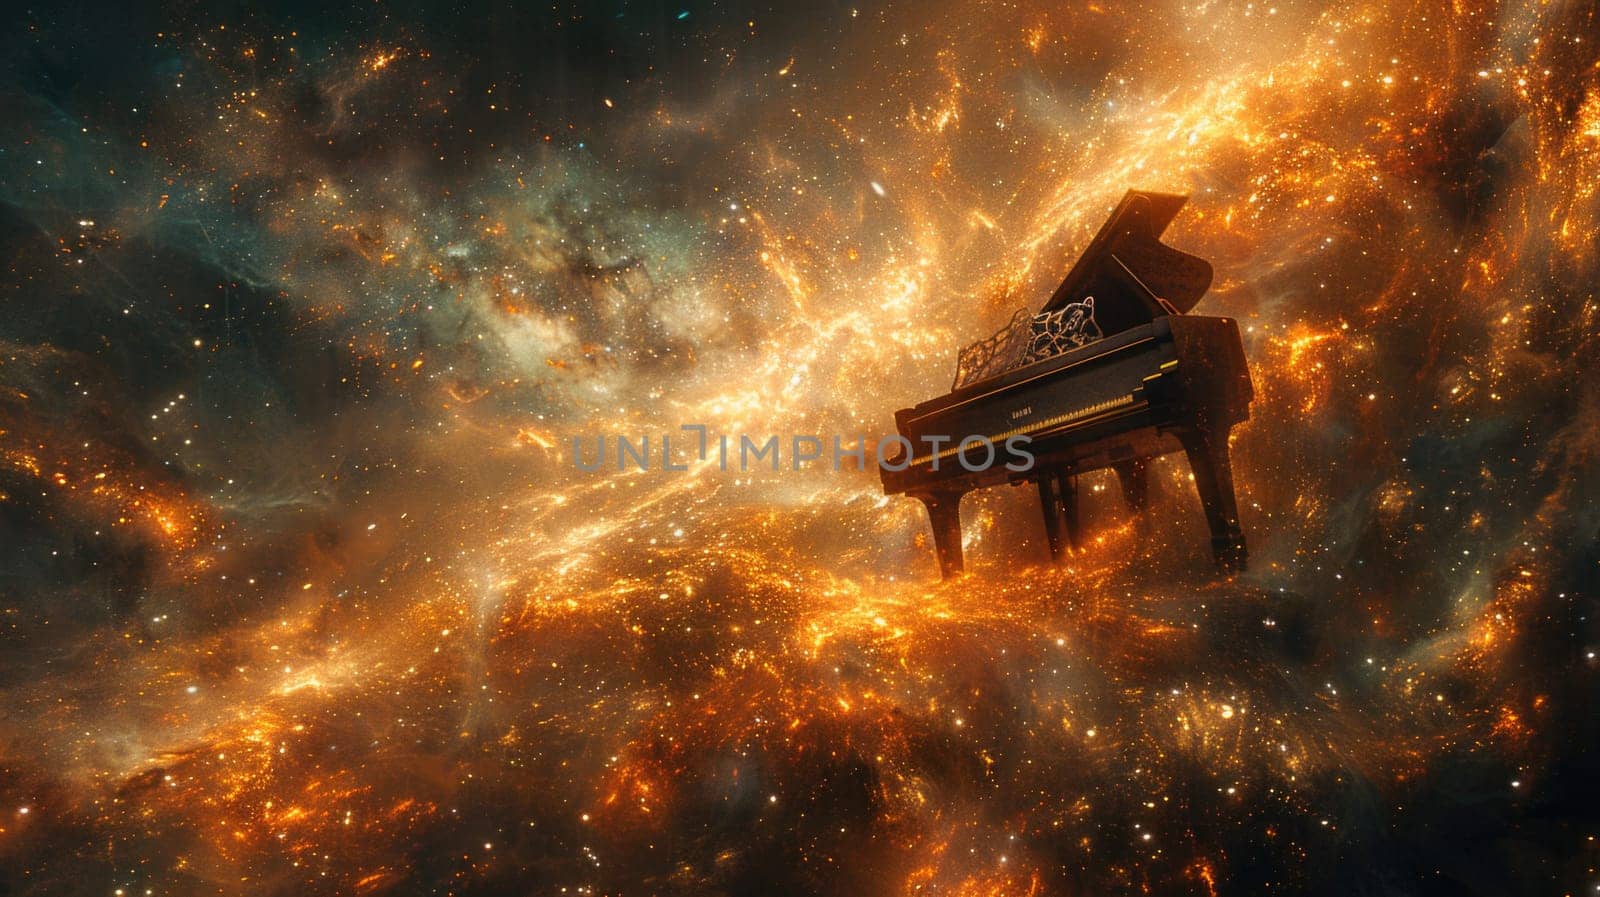 A grand piano stands in a space filled with stars, creating a unique setting for music under a starlit sky.